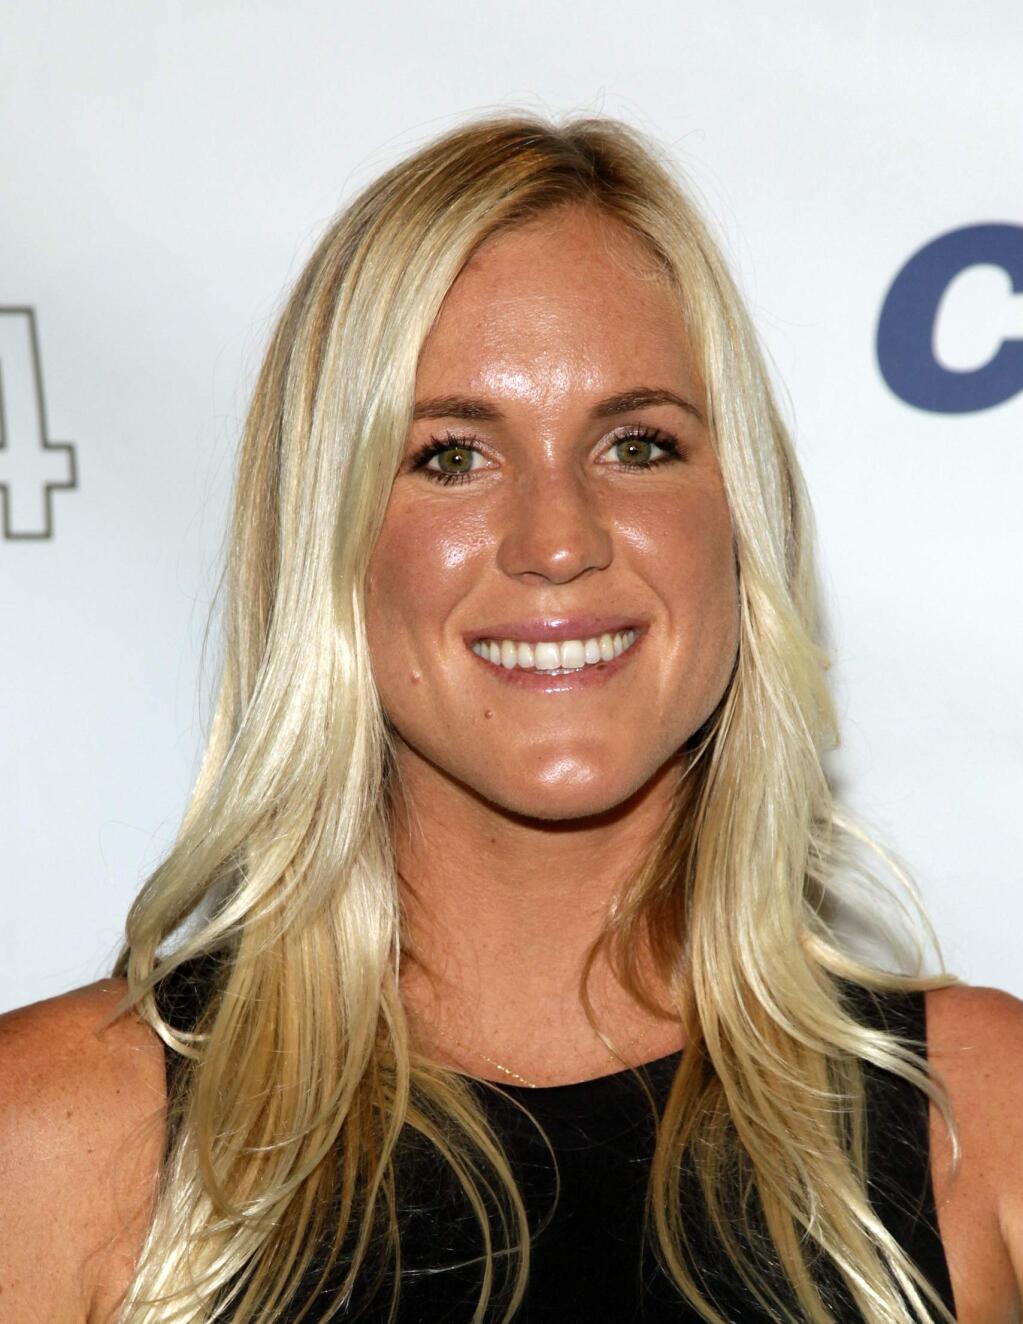 Bethany Hamilton attends Cantor Fitzgerald and BGC Partners' 10th Annual Charity Day on Thursday, Sept. 11, 2014 in New York. (Photo by Andy Kropa/Invision/AP)